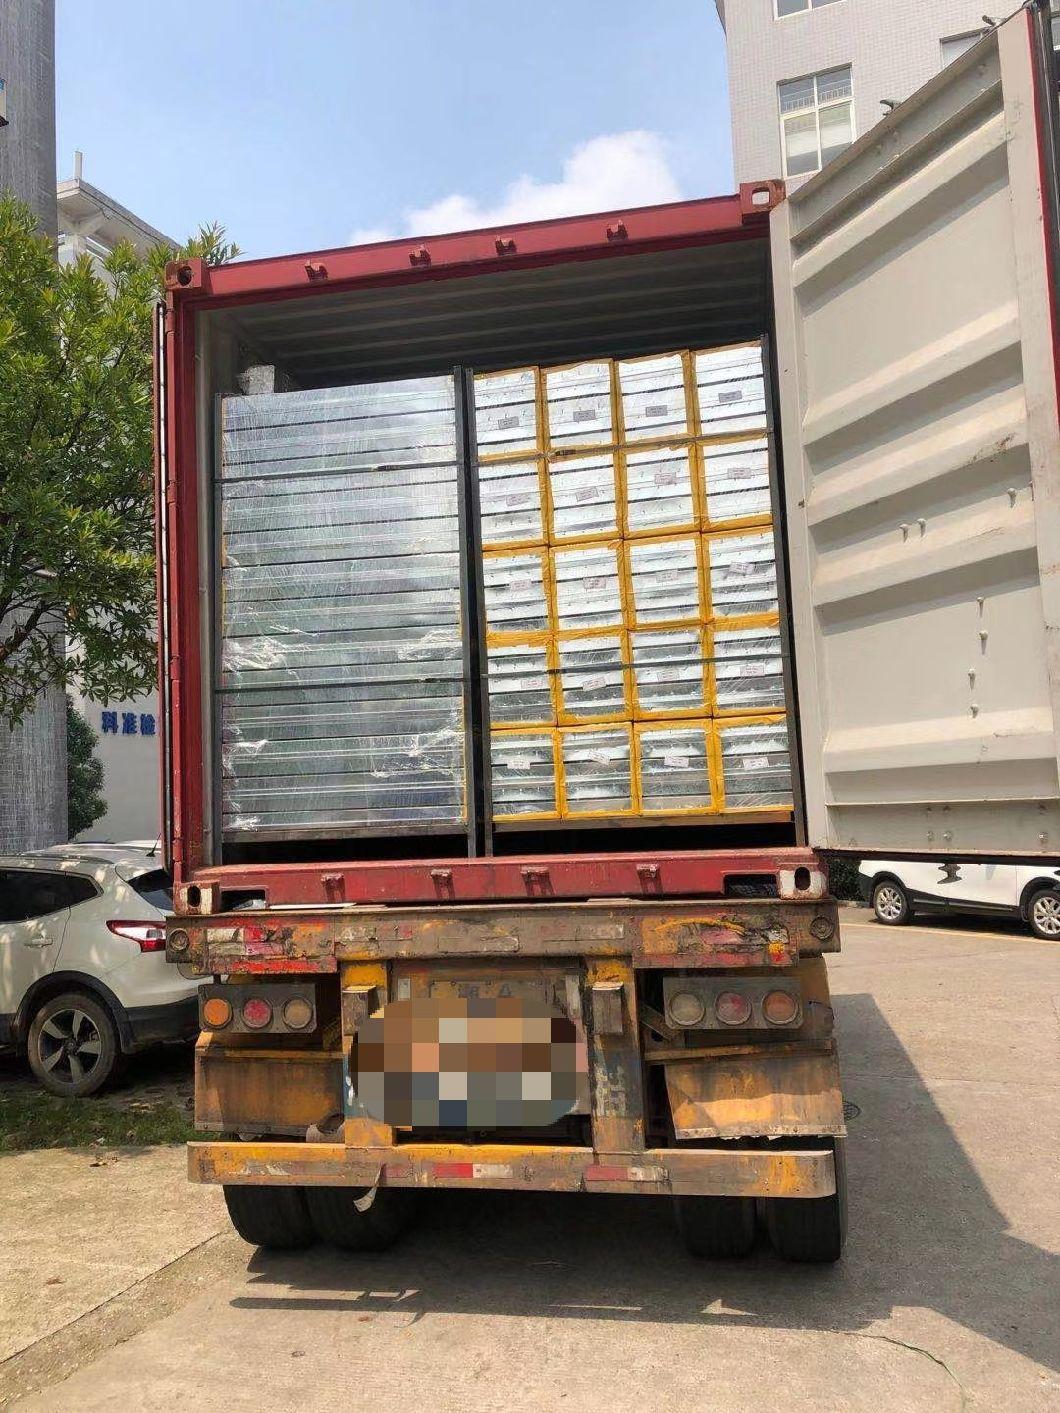 Hq Galvanized Sheet Iron Core Tray with Lid